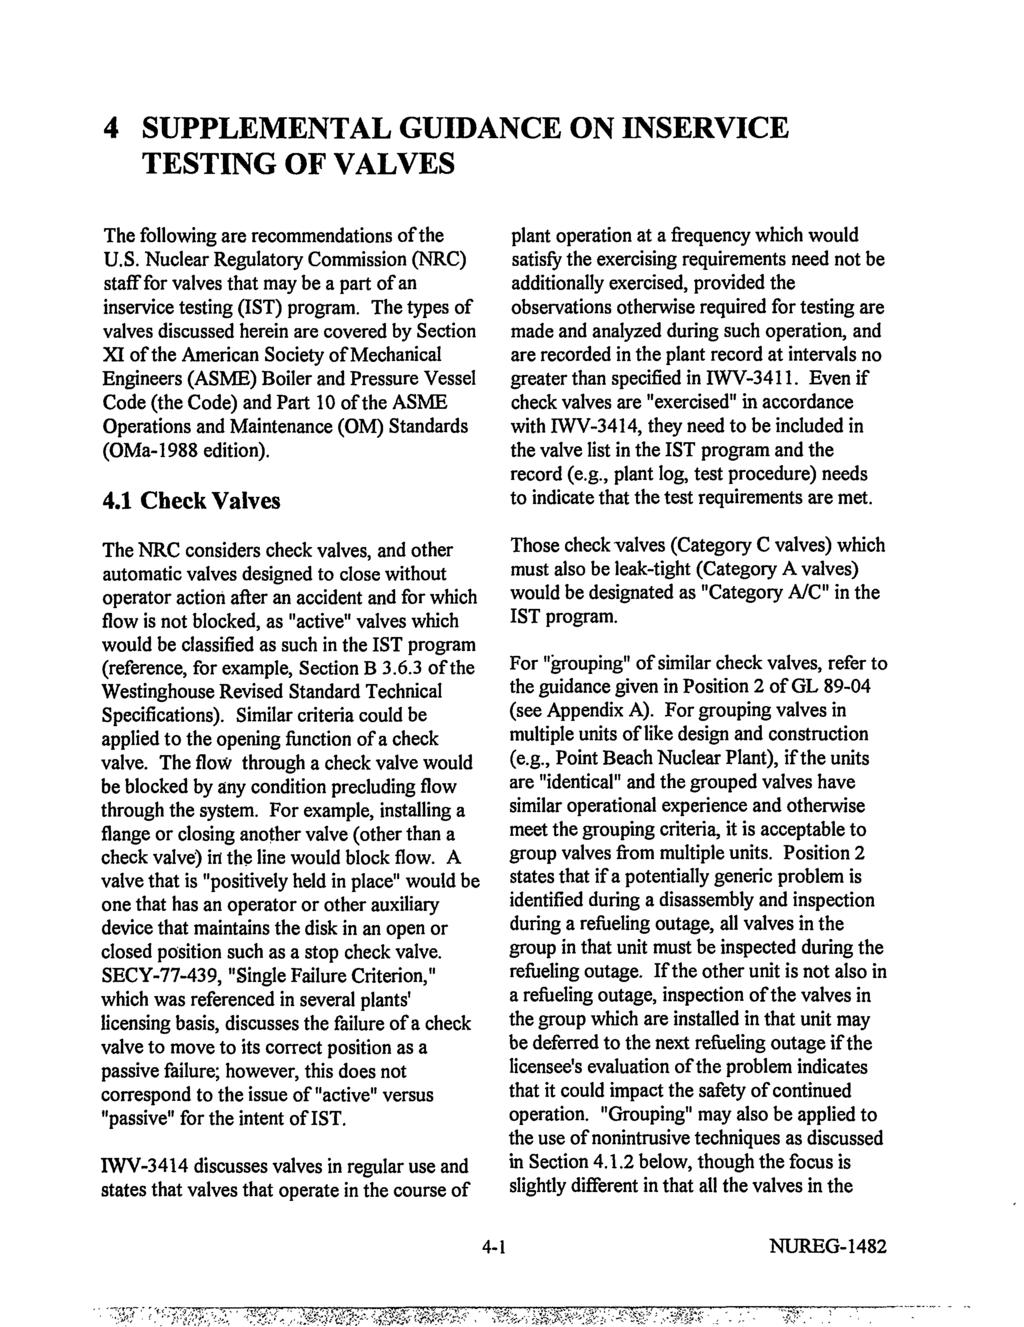 4 SUPPLEMENTAL GUIDANCE ON INSERVICE TESTING OF VALVES The following are recommendations of the U.S. Nuclear Regulatory Commission (NRC) staff for valves that may be a part of an inservice testing (1ST) program.